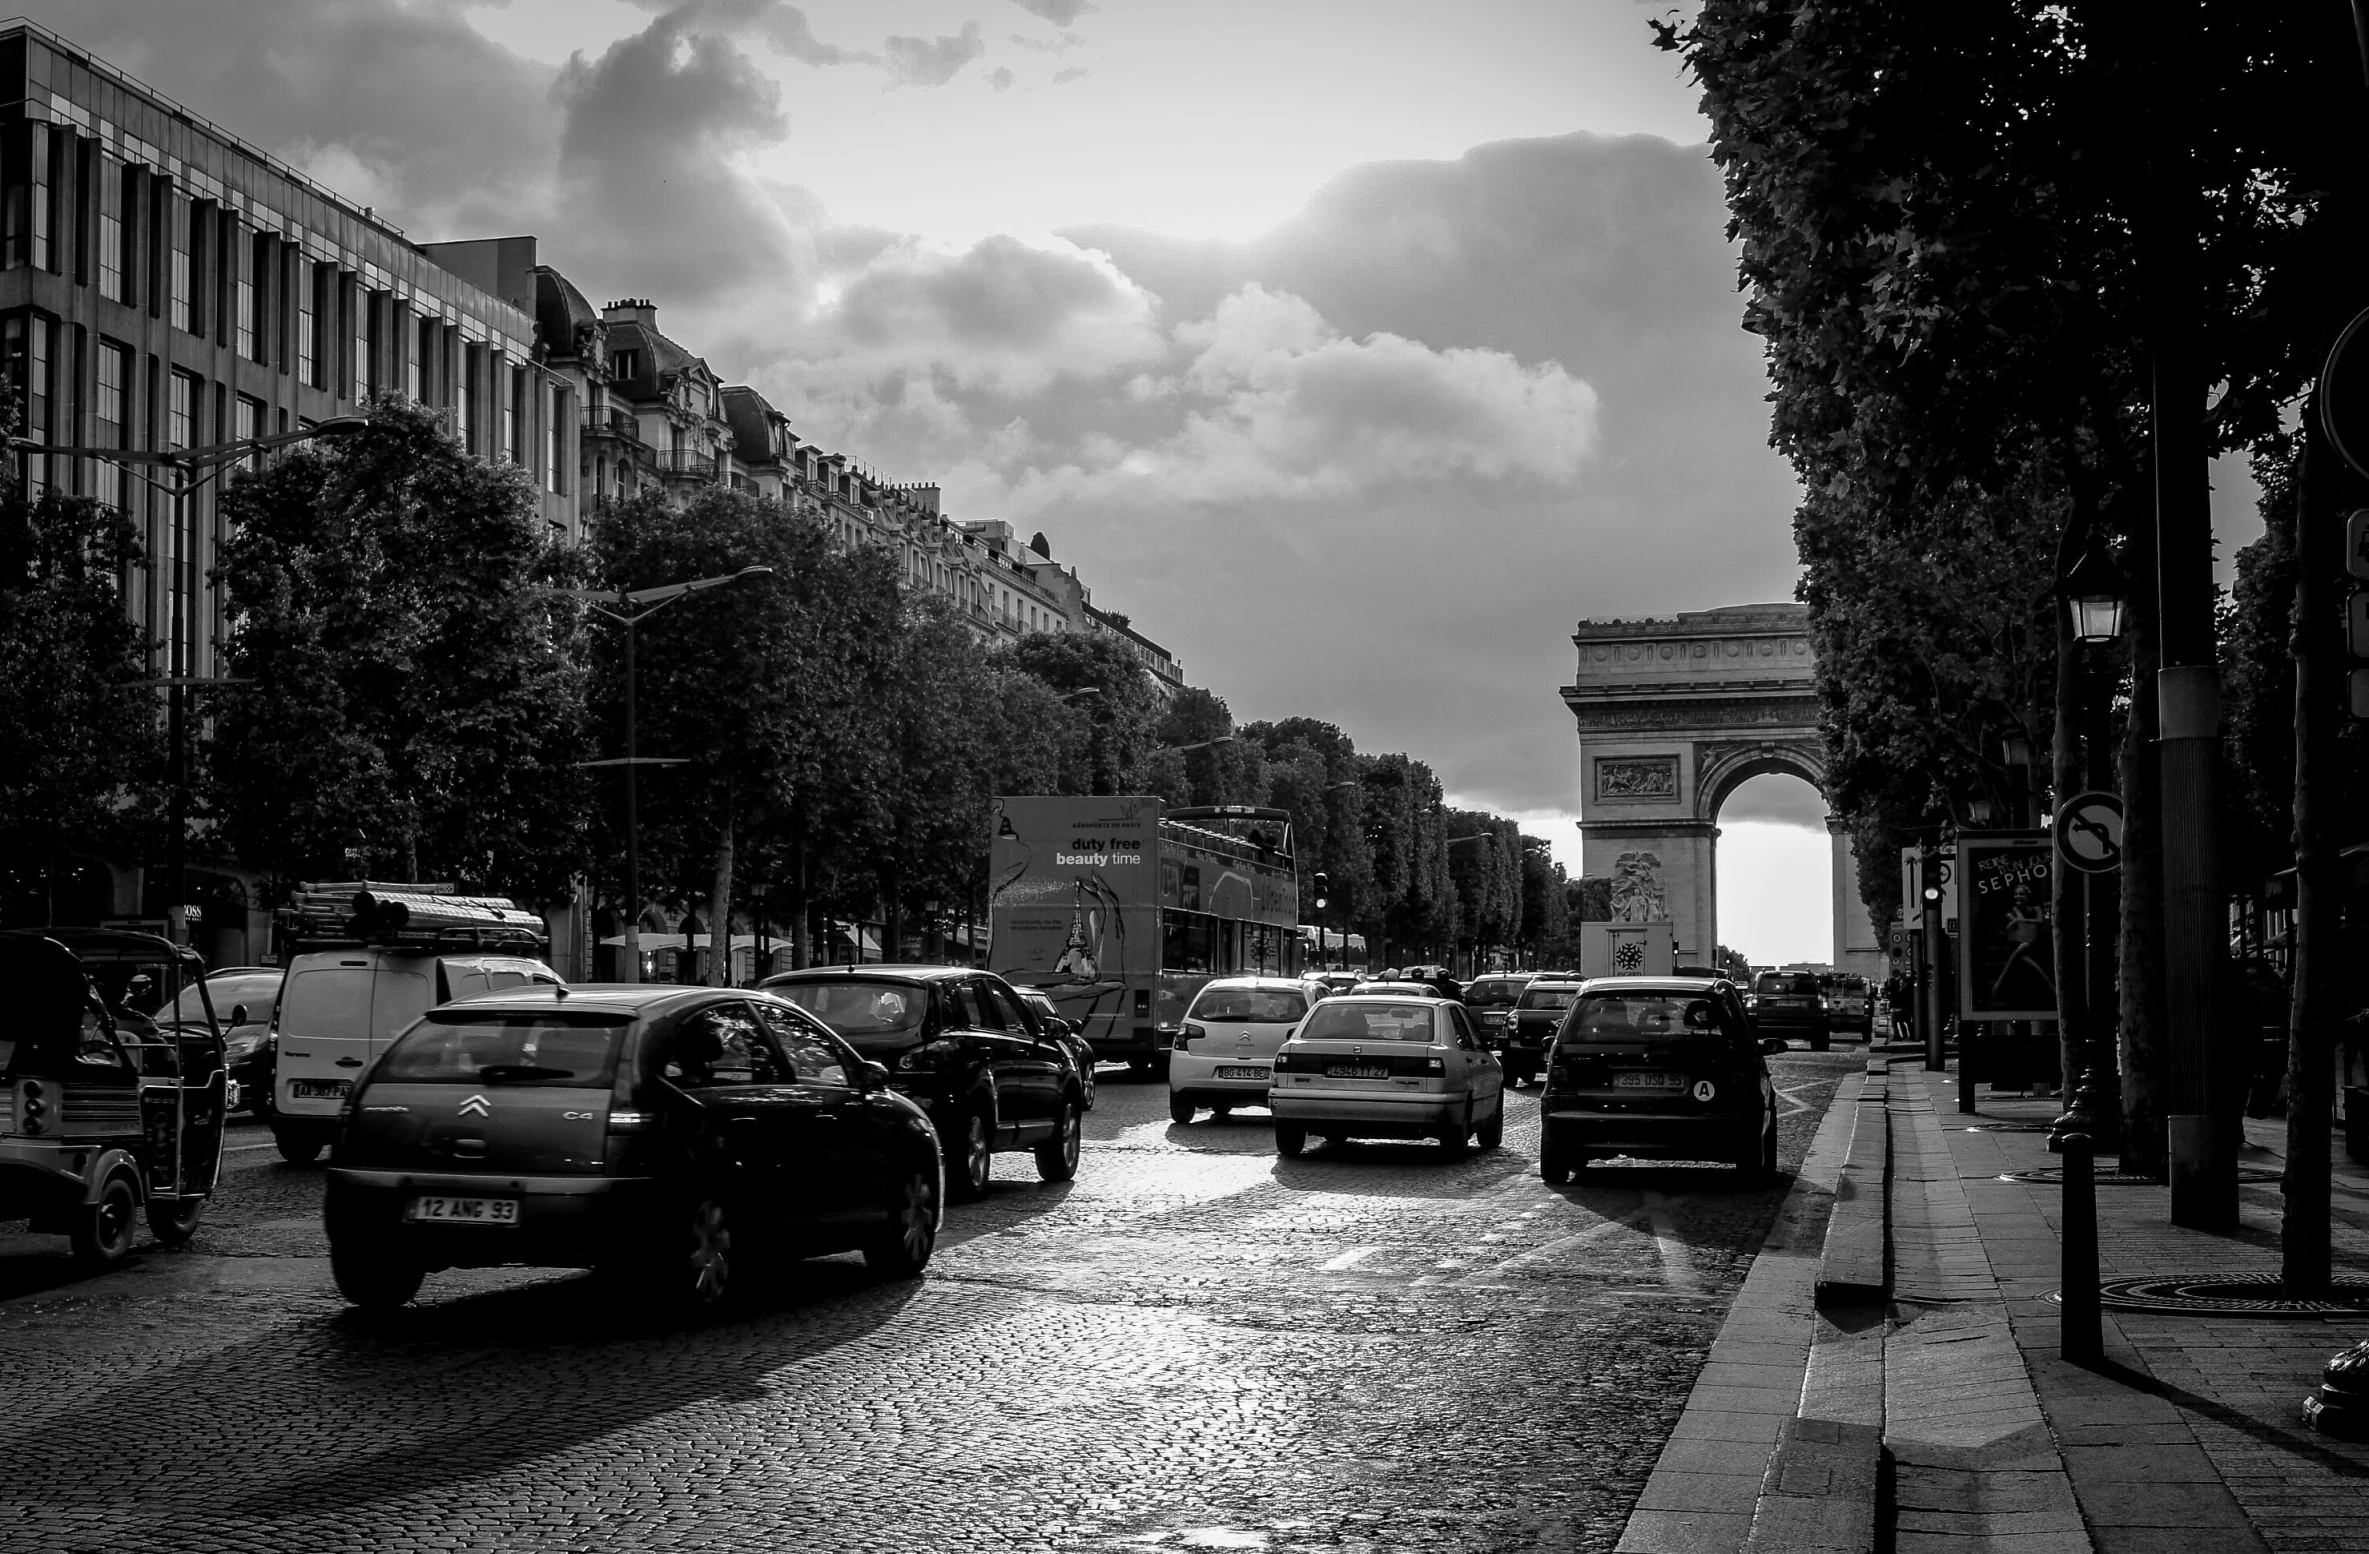 a street filled with lots of traffic next to tall buildings, a black and white photo, by Etienne Delessert, unsplash, arc de triomphe full of graffiti, square, car, uploaded